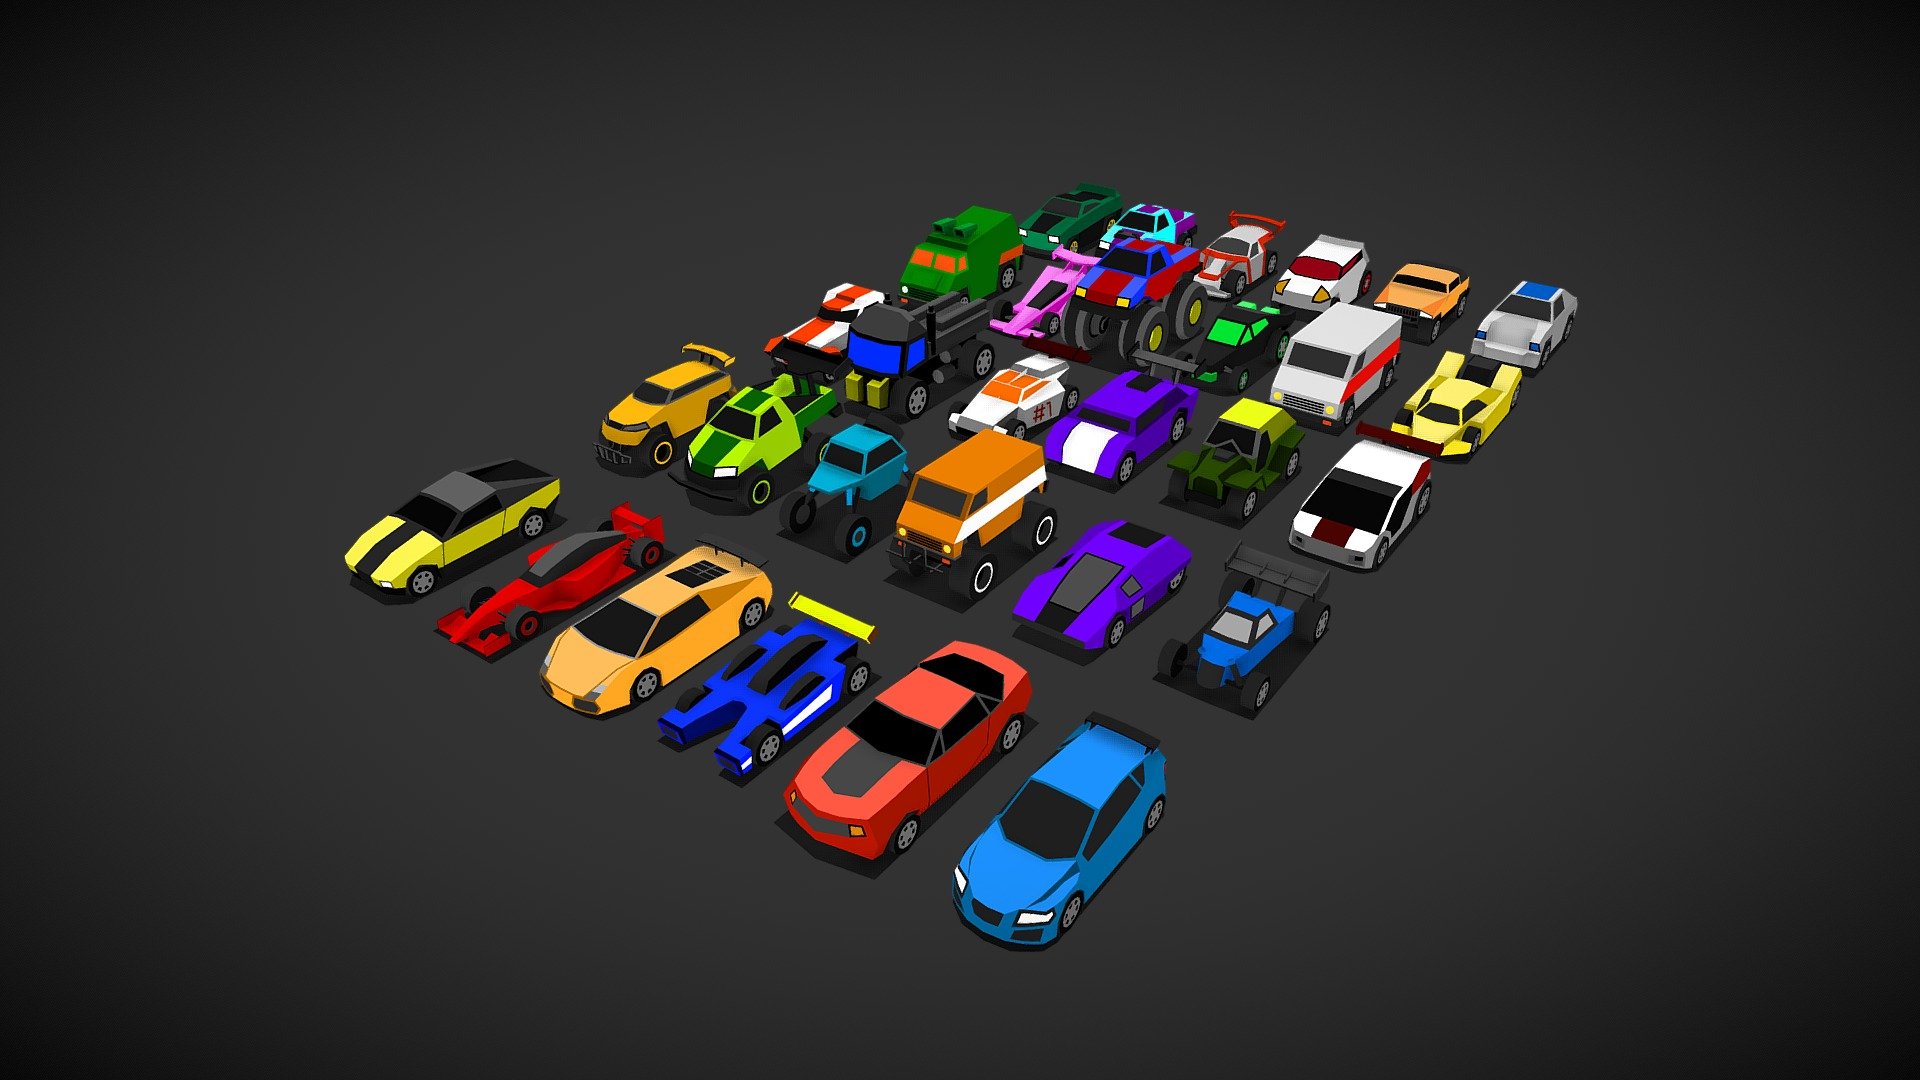 Can be bought on the unity asset store:

-link removed- - Mobile Toon Cars - 3D model by gvrocksnow 3d model